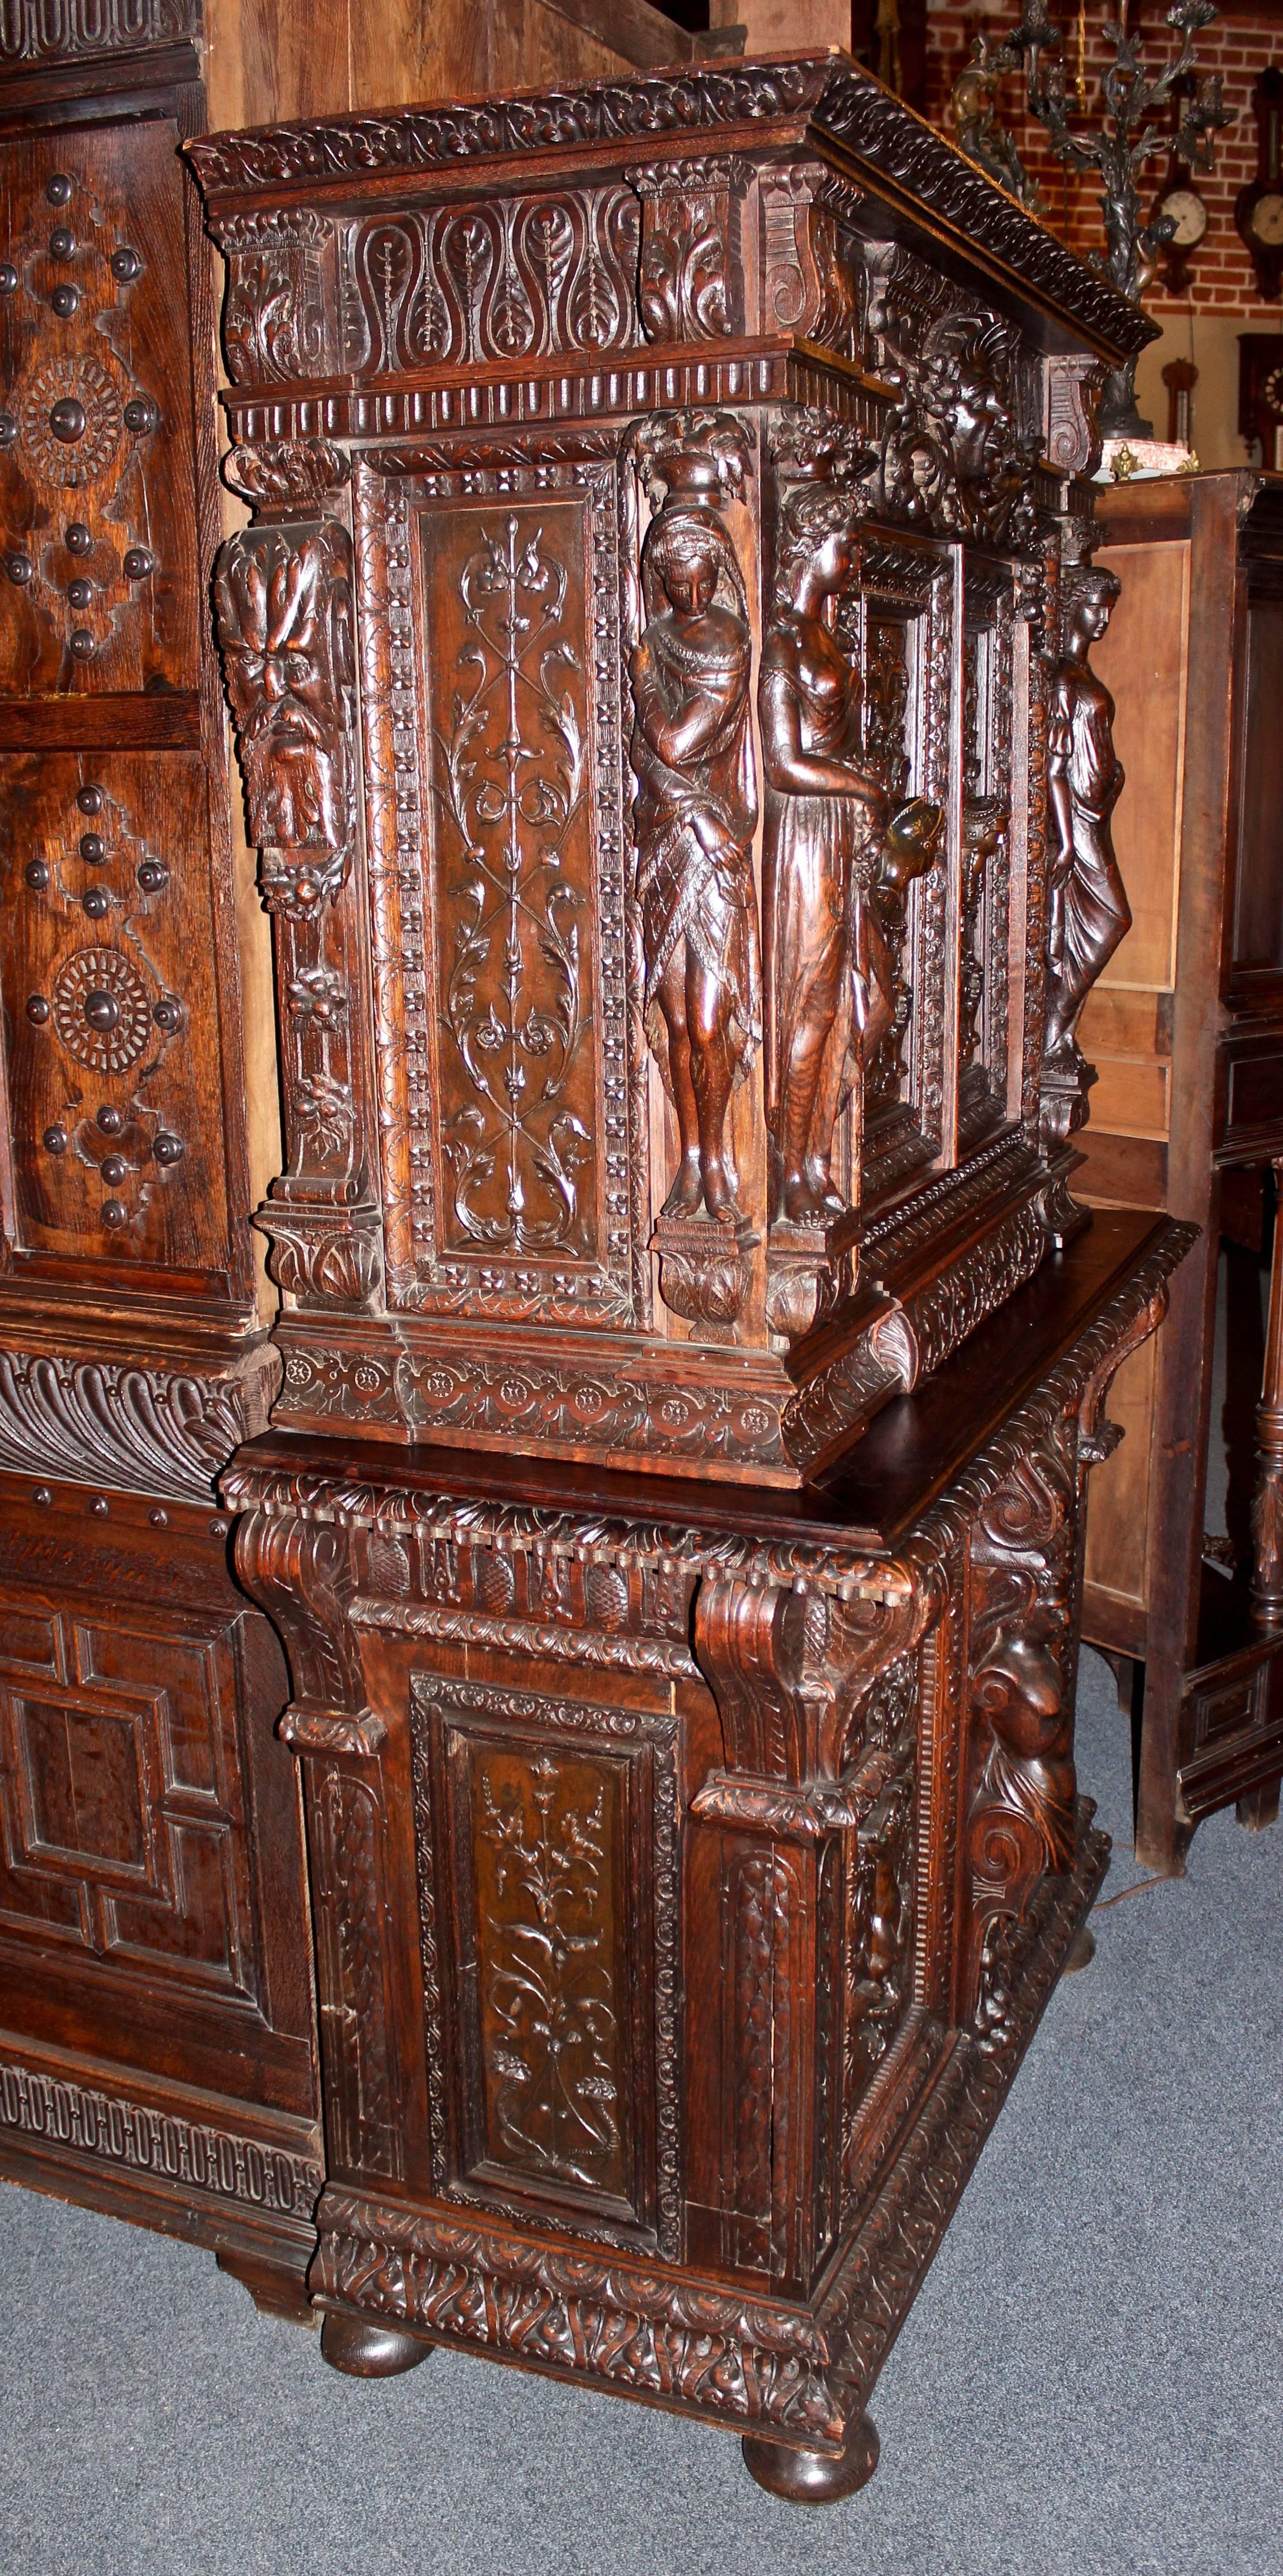 This French cabinet was hand-carved in the 1800s from walnut. It features hinge open doors on top, three pull-out drawers, and decorative, non-functioning doors on the bottom. Main panels are painted spelter. Inside was painted red after original